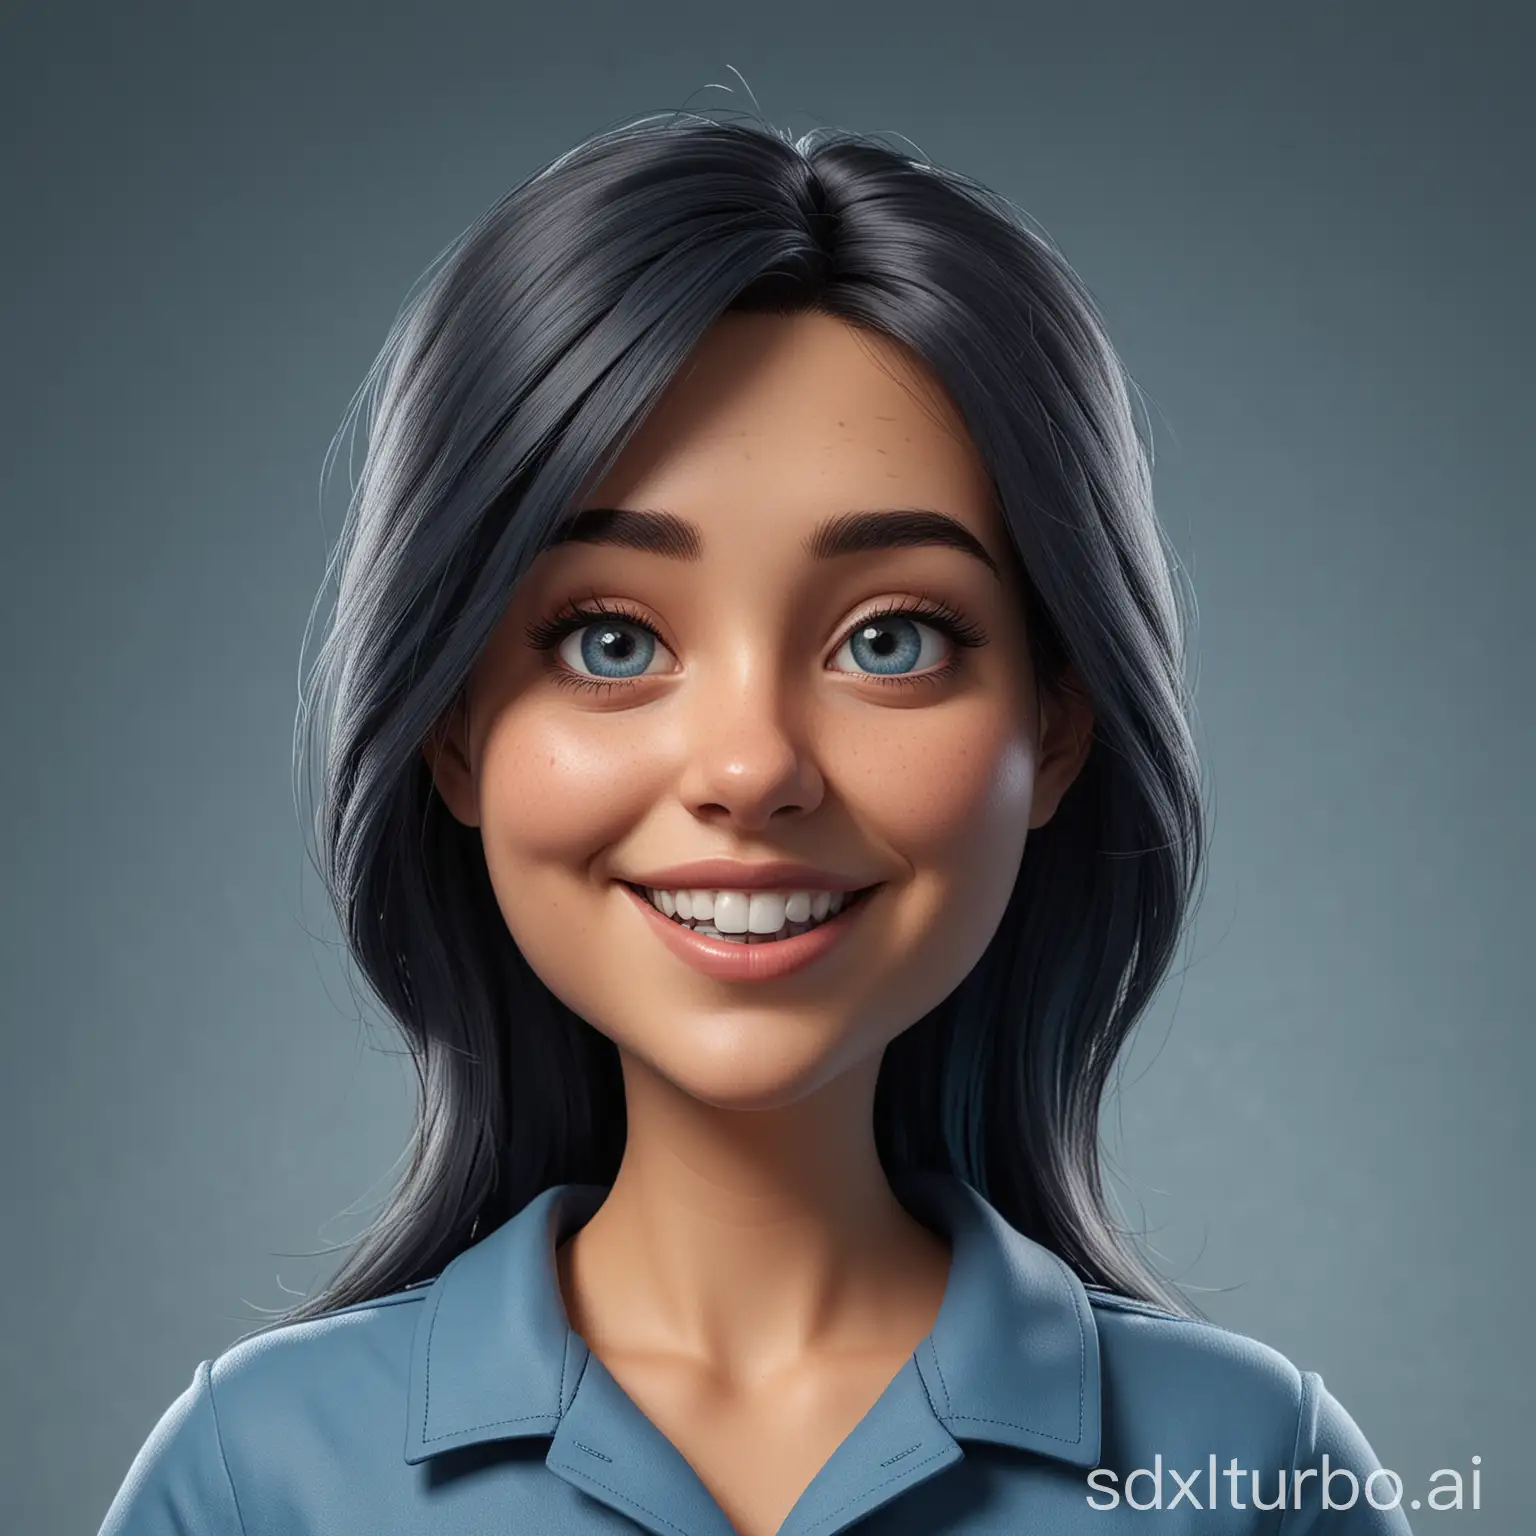 Create a realistic caricature 3D cartoon style full body with a large head. Fat and short body, a 23 year old woman. Long shagy hair, oval face shape, chubby, droopy eyes, flat nose, smile with an open mouth. Wearing a blue uniform. Face angle 2/3. Gray color background. Use soft photography lighting, uhd, hd, 20k. Hyperrealistic, intricate details, color depth, dramatic, side light, blue gradient colorful background.